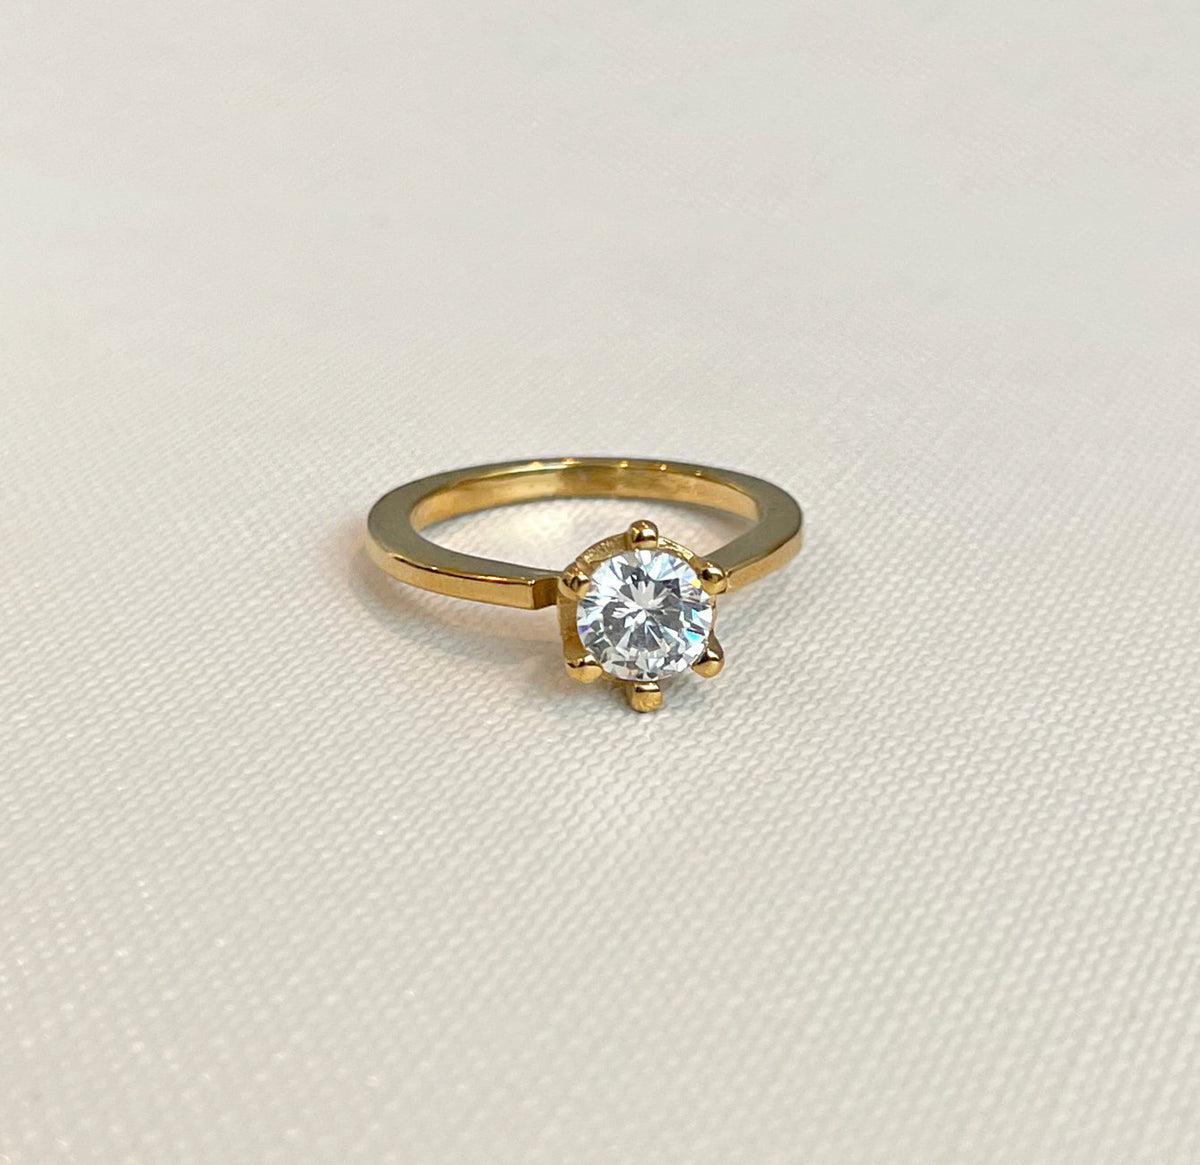 18K GOLD 6 PRONG SOLITAIRE RING - SAMPLE